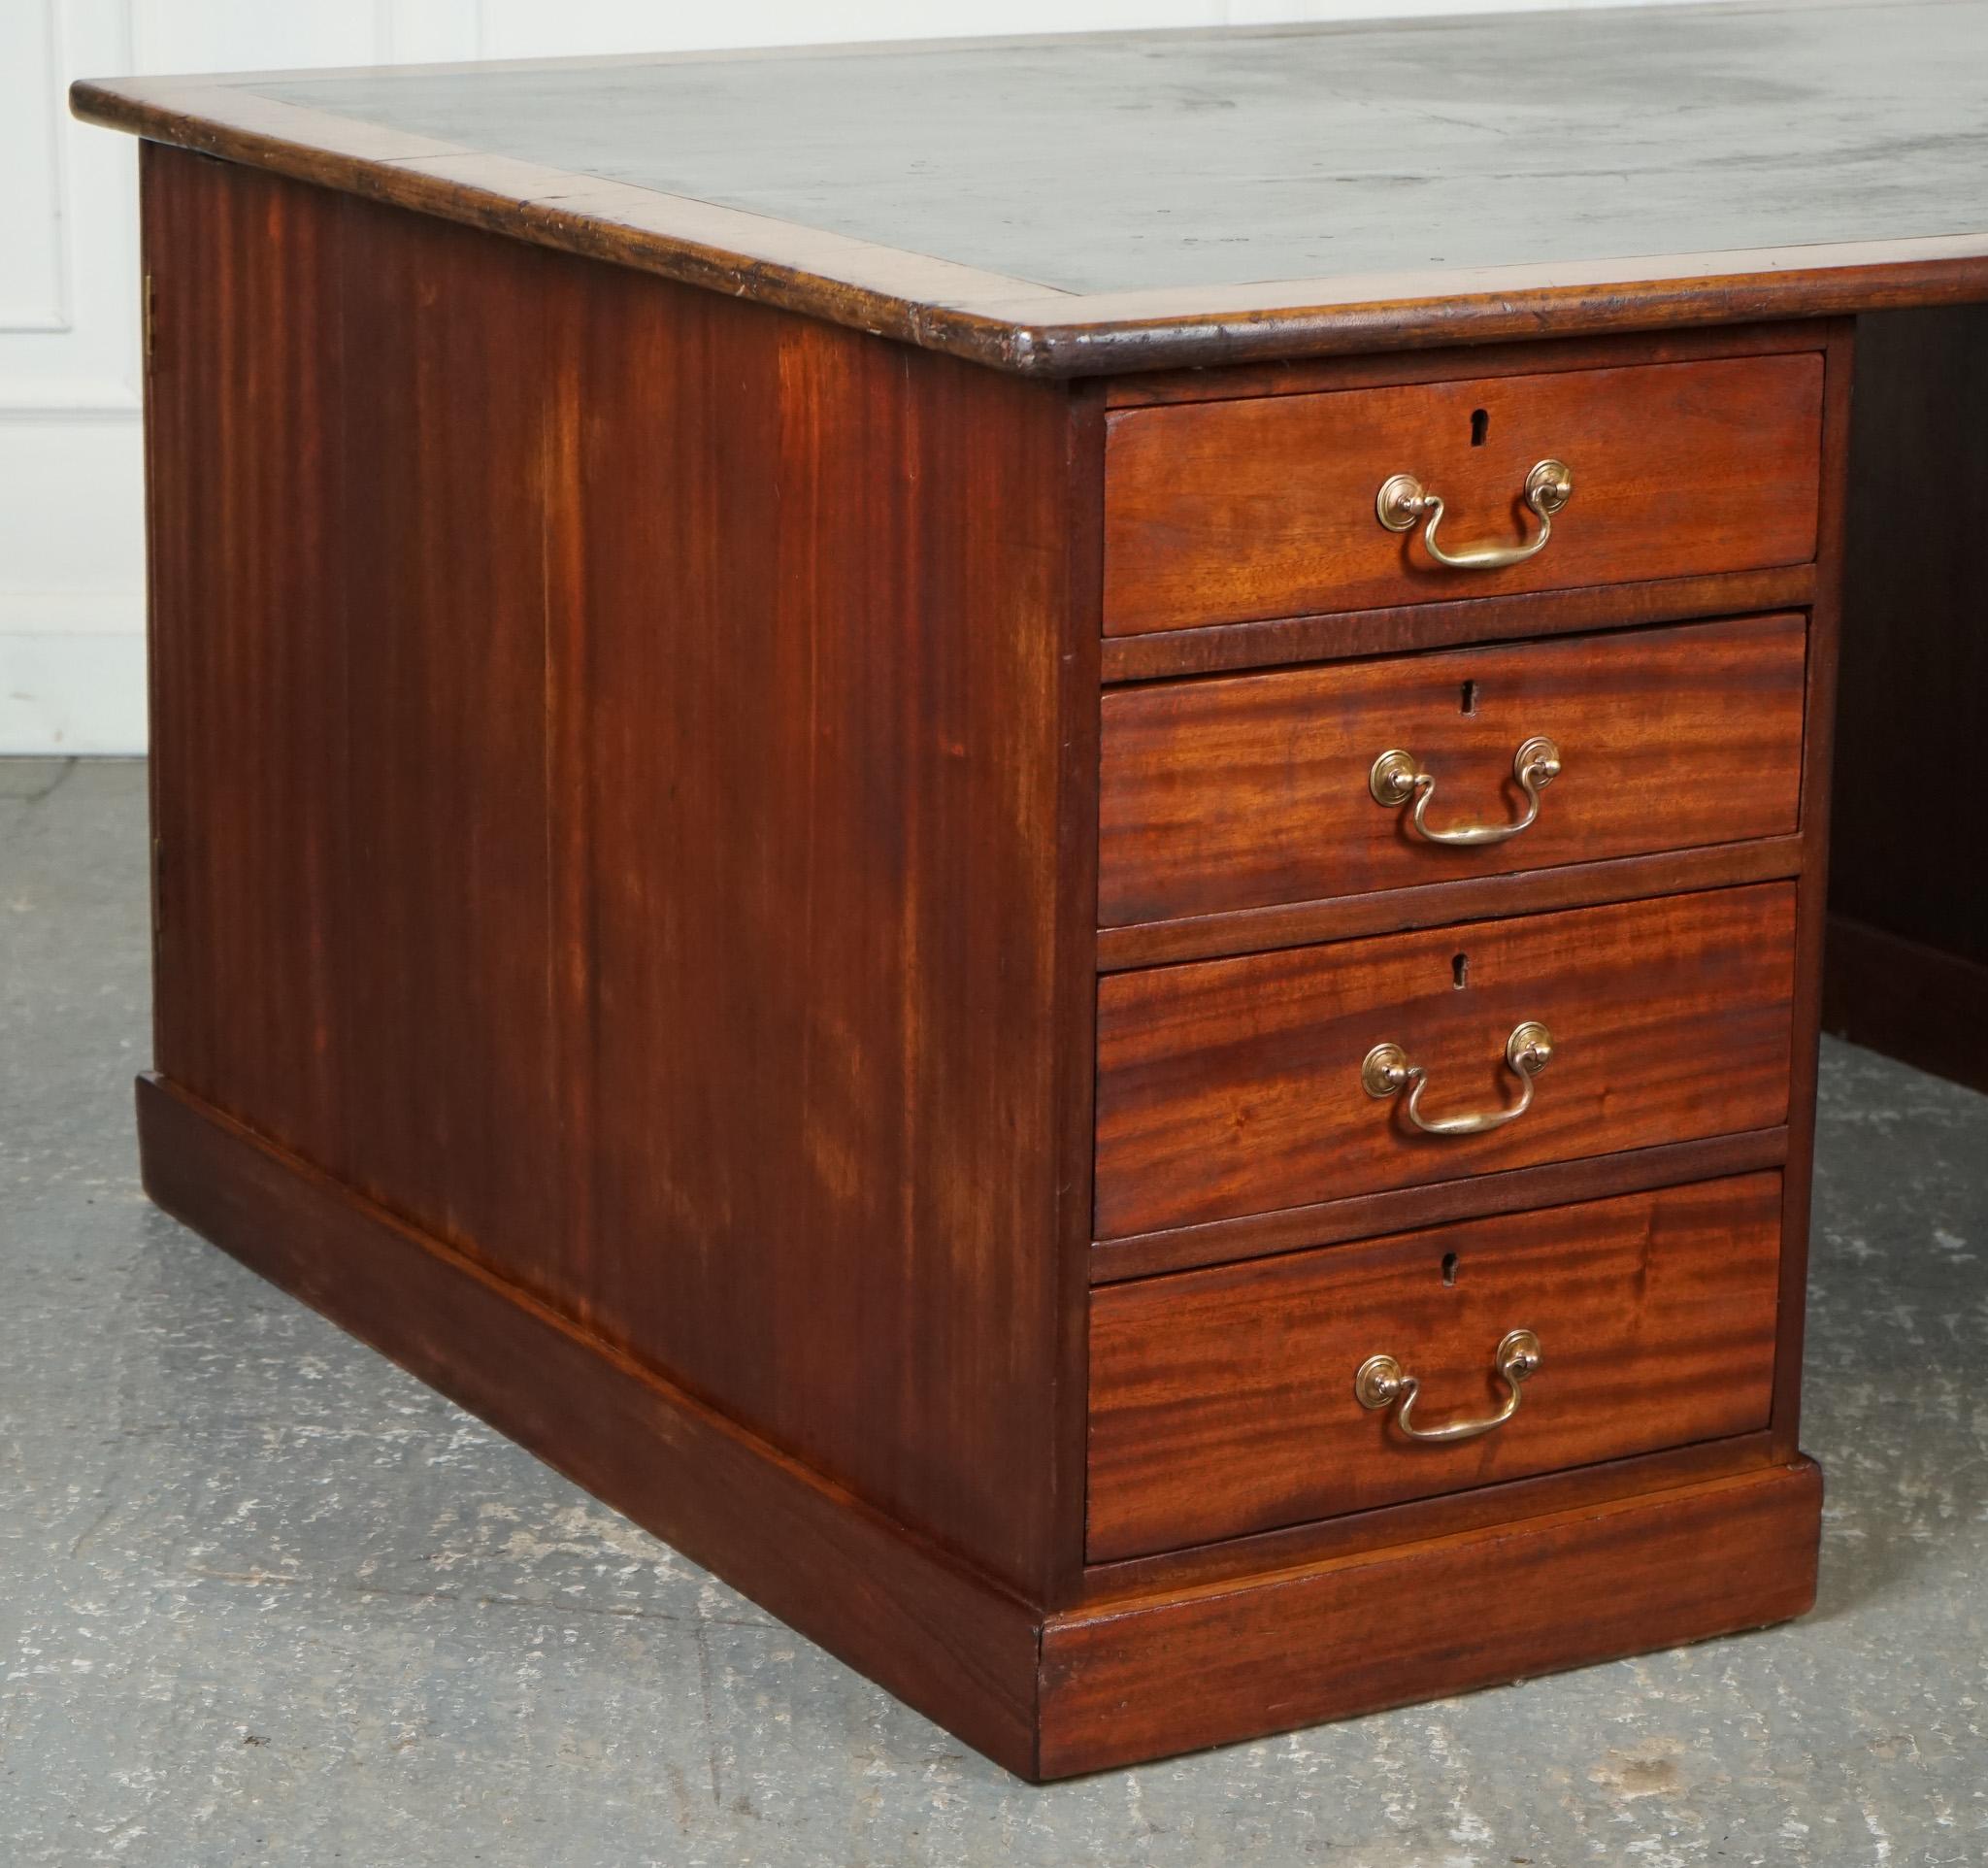 

We are delighted to offer for sale this Huge Partners Desk With Navy Blue Desk.

An antique huge distressed partners desk with a navy blue leather top is a magnificent and imposing piece of furniture that exudes character and vintage charm.

The